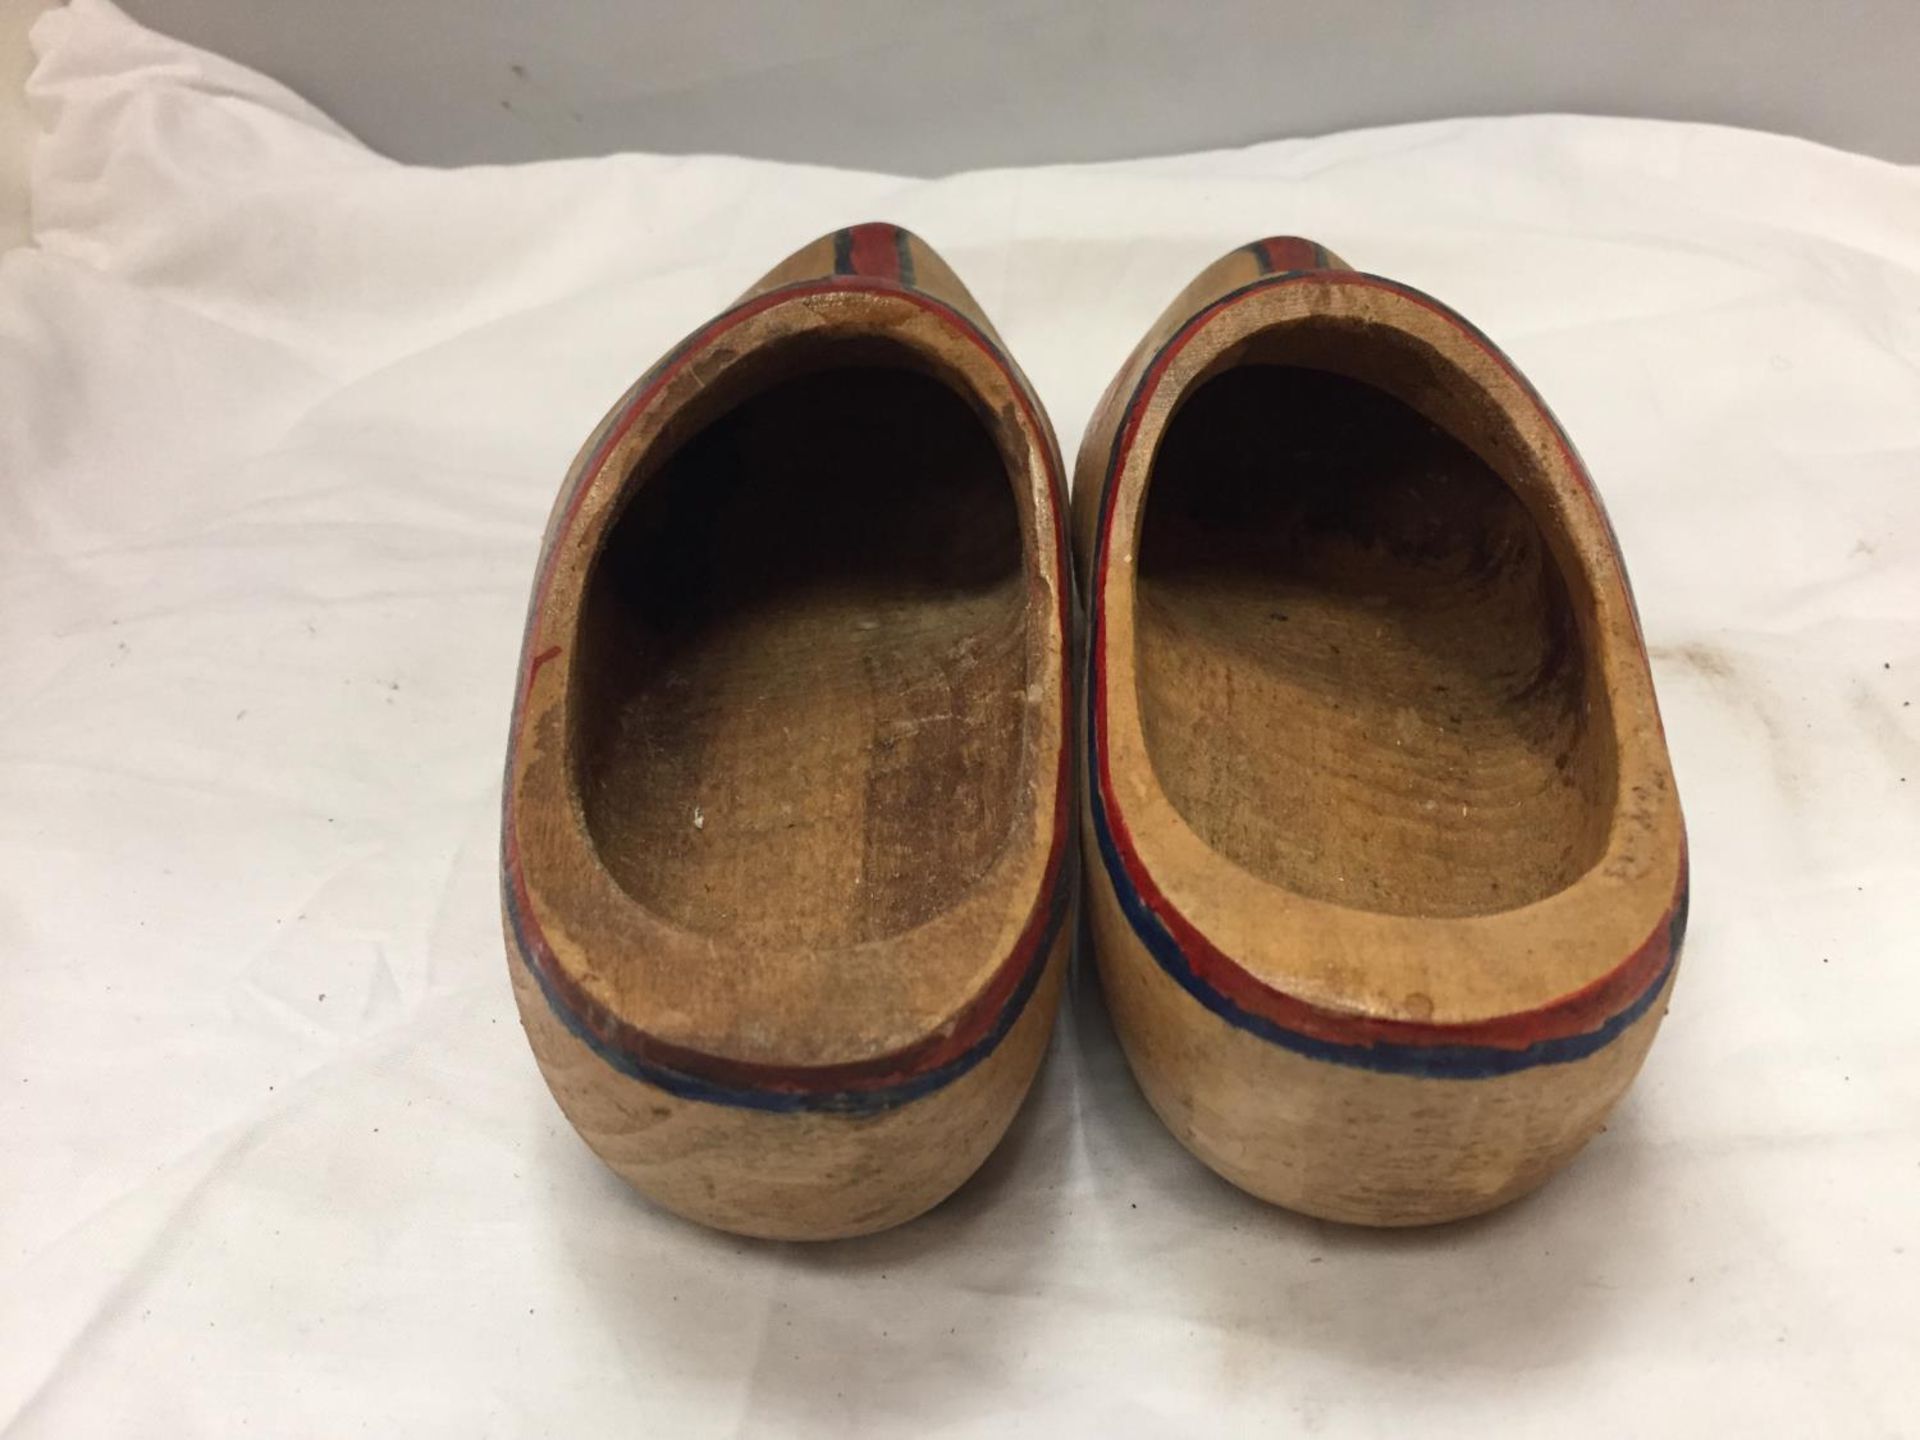 A PAIR OF WOODEN CLOGS - Image 3 of 3